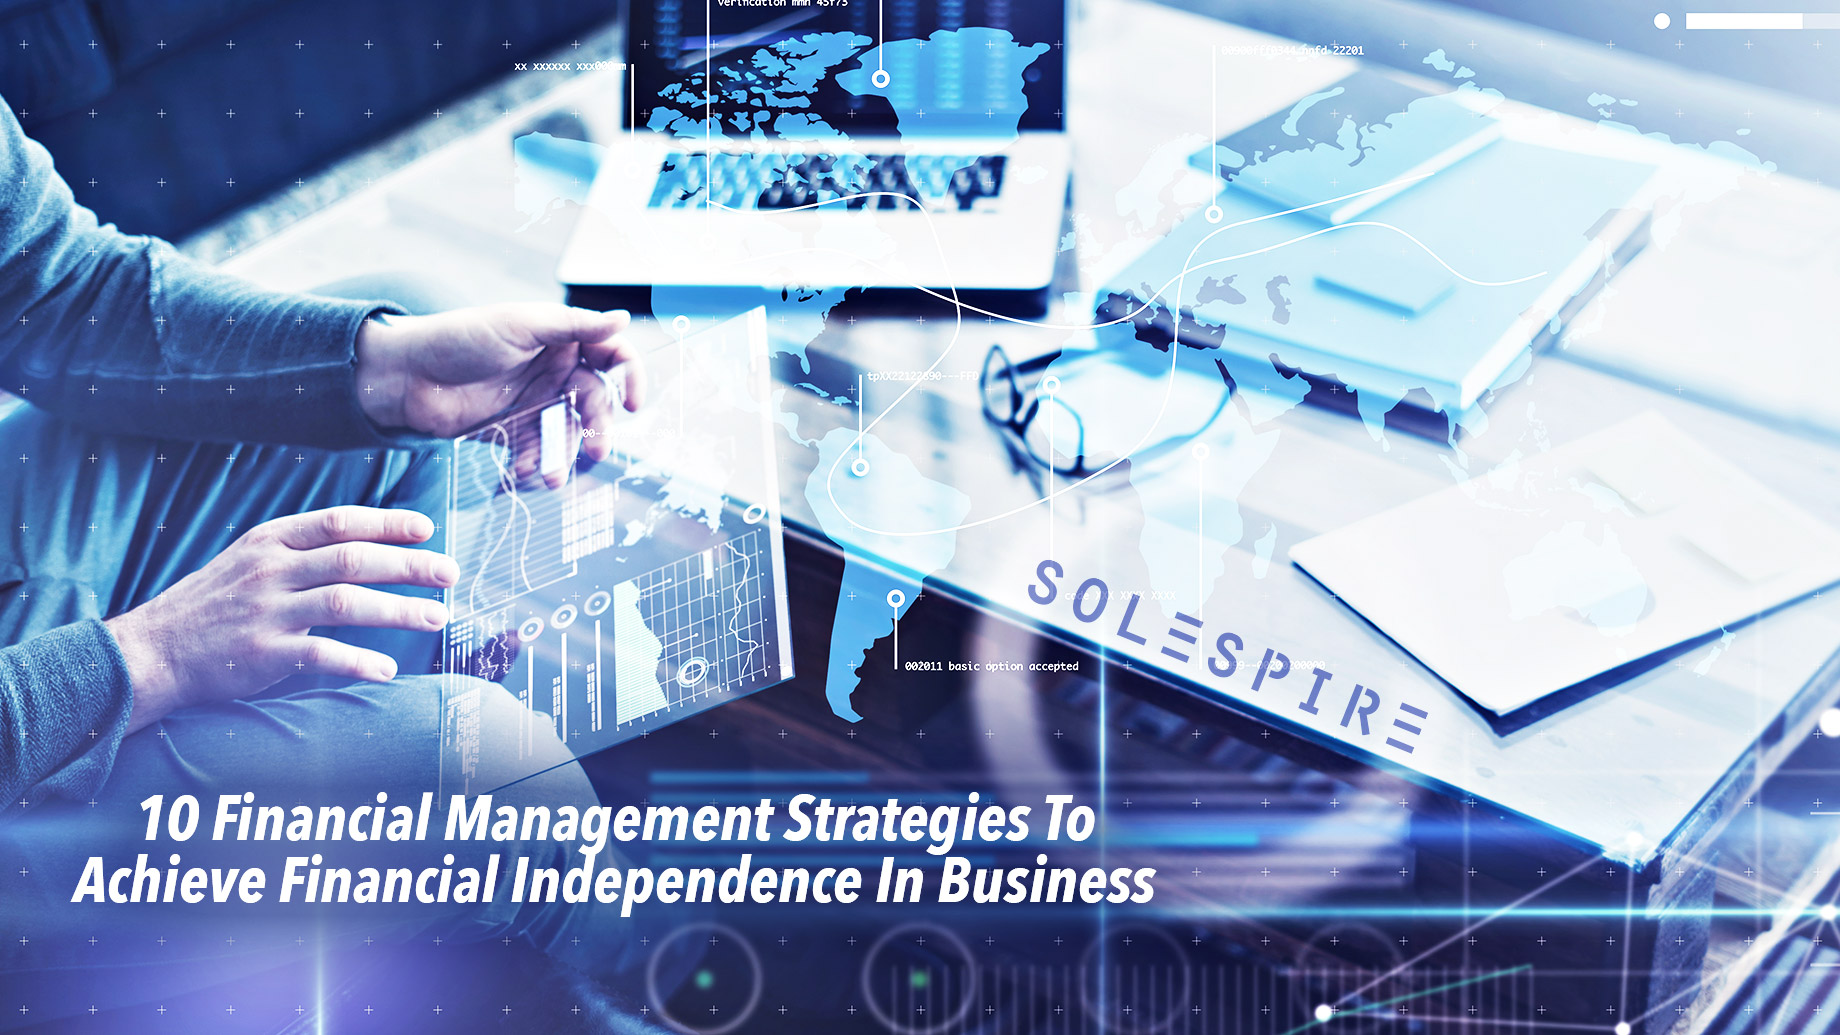 10 Financial Management Strategies To Achieve Financial Independence In Business